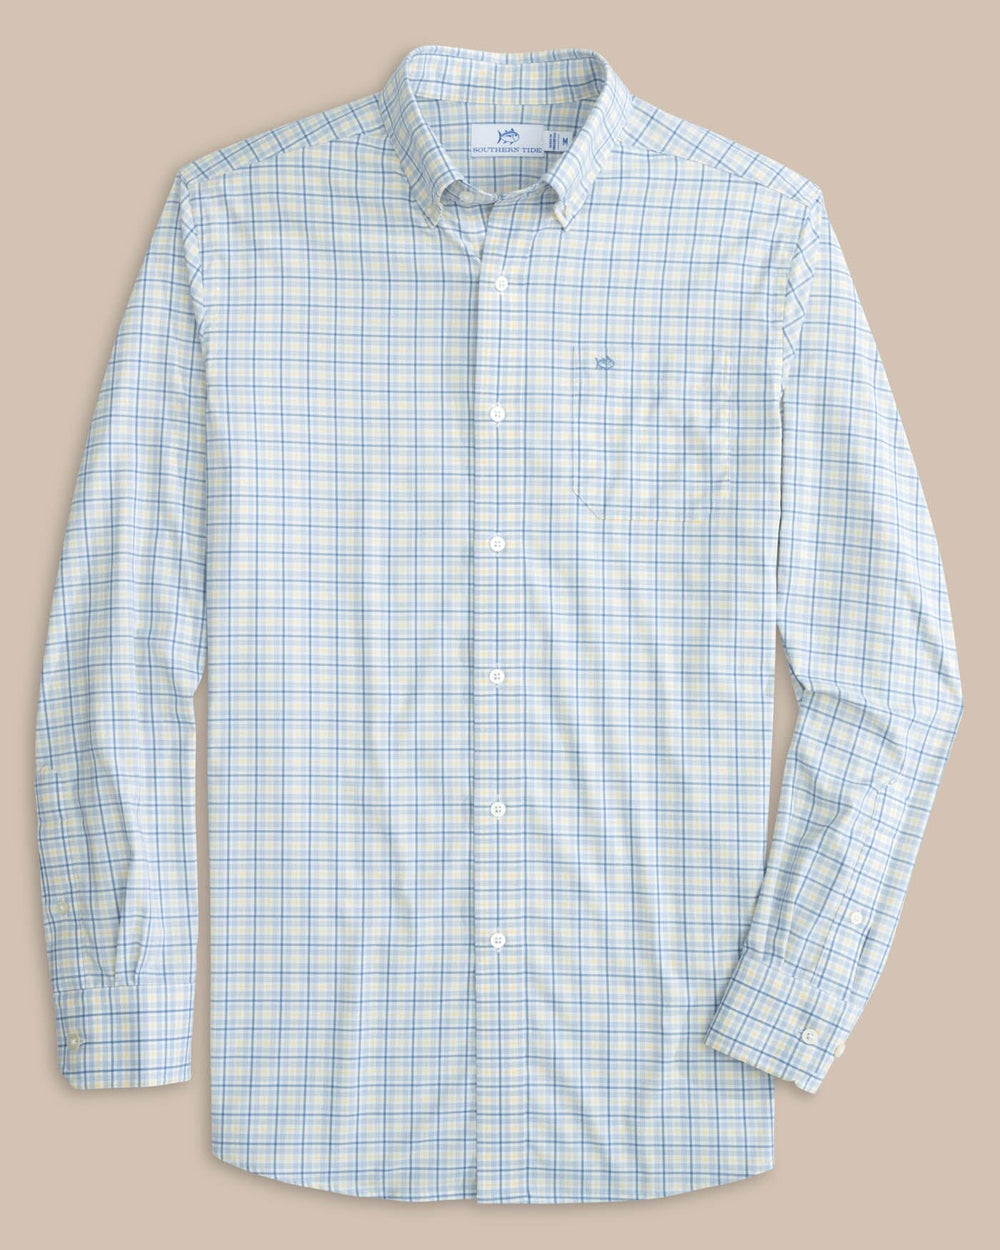 The front view of the Southern Tide Intercoastal Falls Park Plaid Long Sleeve SportShirt by Southern Tide - Coronet Blue